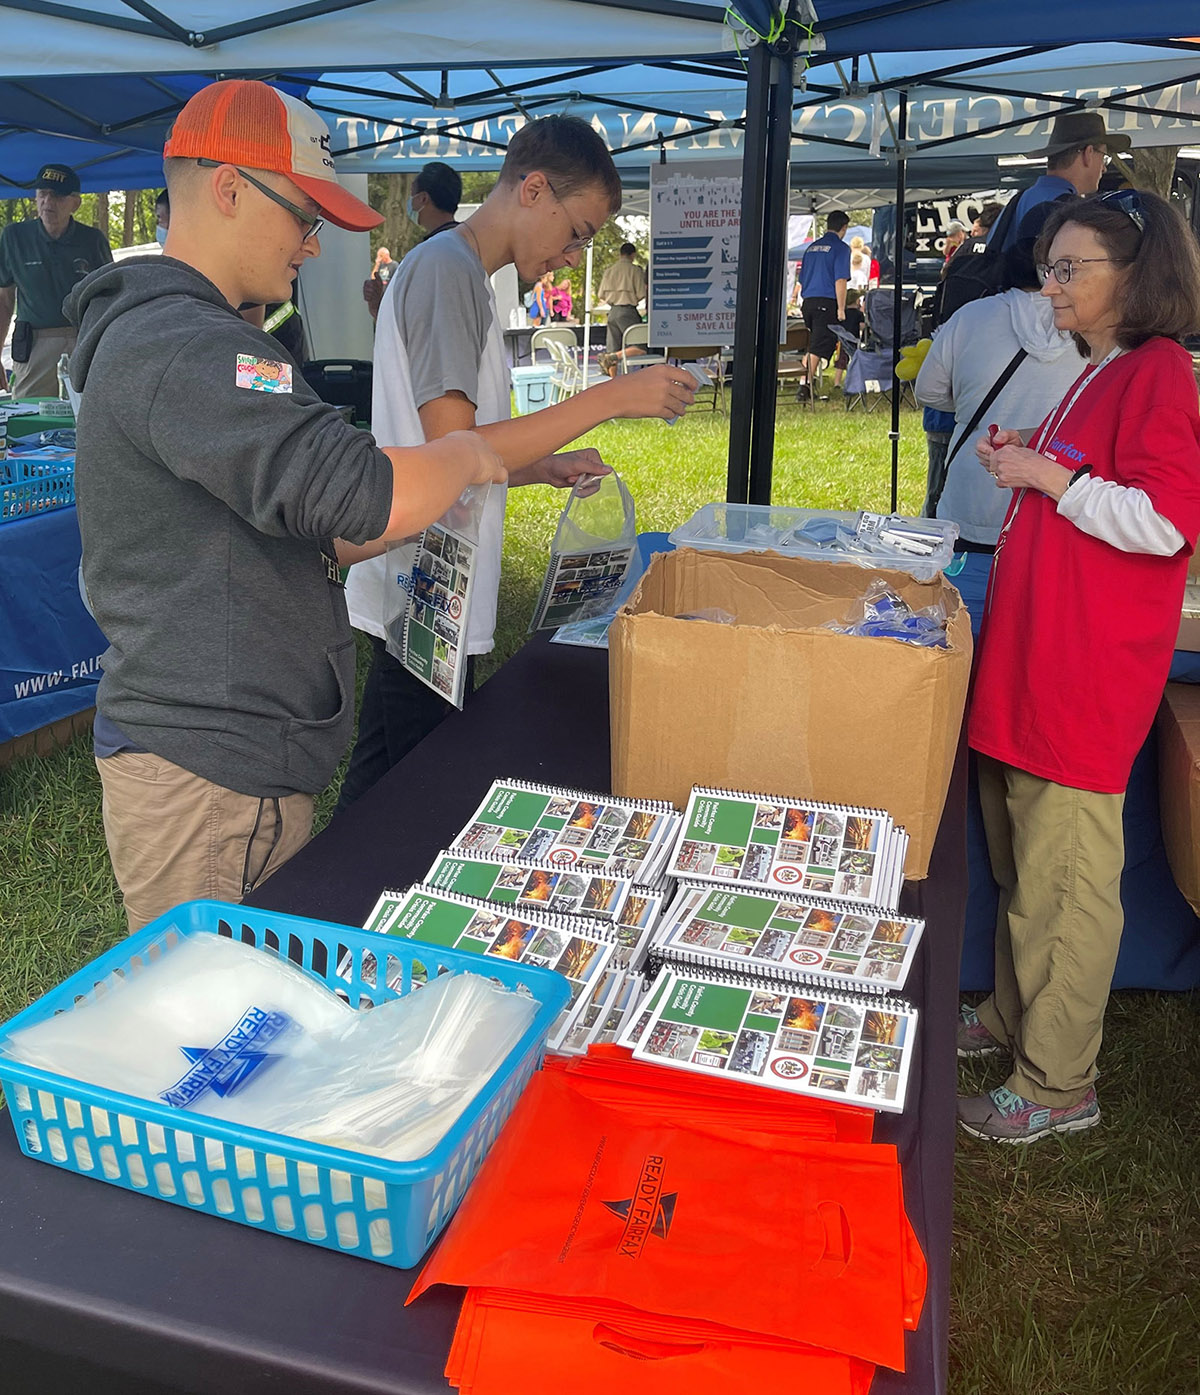 Volunteers with the Emergency Management Volunteer Corps working at a public outreach event.